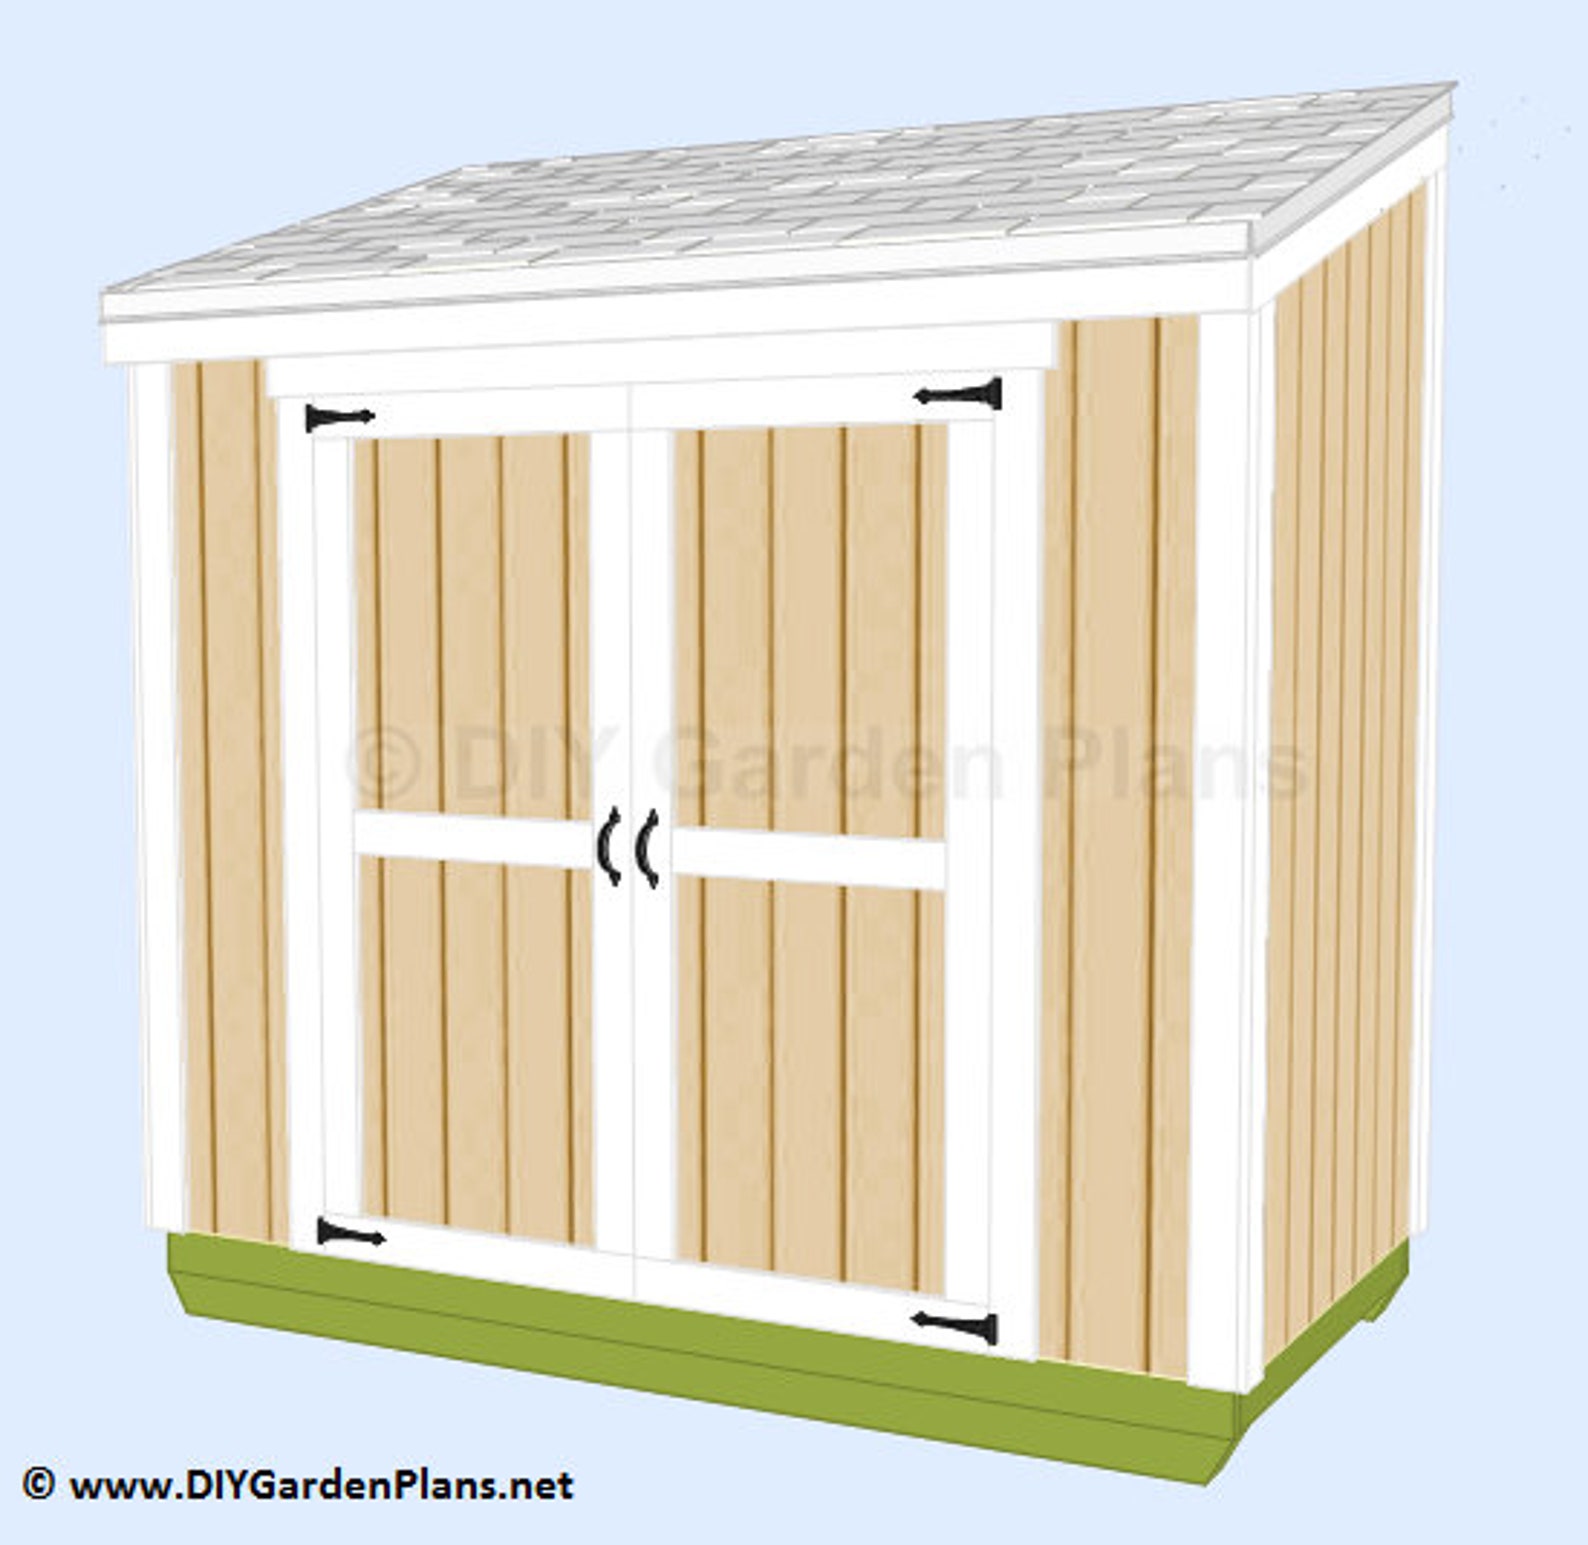 4x8 Lean to Shed Plans PDF Download - Etsy